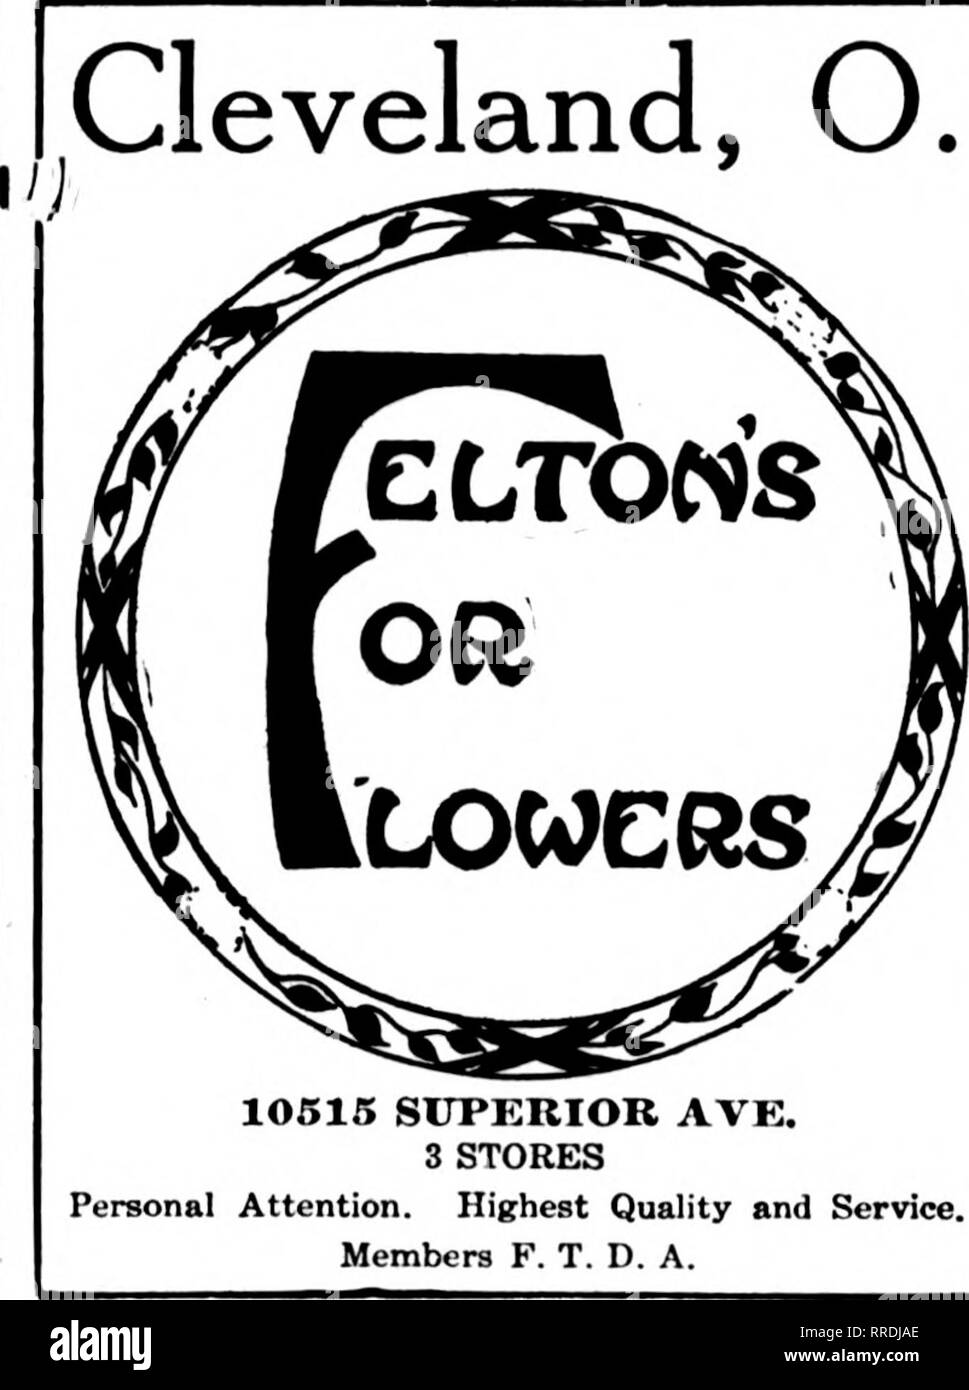 . Florists' review [microform]. Floriculture. SCHRAMM BROS. 1315 Cherry St. TOLEDO, OHIO Stock, Workmanship and Service first-class. Send us some orders and we will reciprocate. HELEN F. PATTEN 907 Madison Ave. Member F.T.D. SUDER* TheToledo,Ohio,Flori^s A. A. SUDER. Proprietor 2941-3003 CHERRY STREET AKRON, OHIO THE HEEPE CO. EXCLUSIVE FLORIST AKRON, OHIO TT''^^ IIAMMKKSCHMIDT &amp; CLARK 12 W. MARKET ST. TOLEDO, OHIO METZ &amp; BATEMAN 221 Superior St. McnilxM-s F. T. D. COLUMBUS, O.. and Vicinity THE MUNK FLORAL CO., Growers Can Fill All Retail Orders The Wilson Seed &amp; Floral Co. ,^-'iK Stock Photo